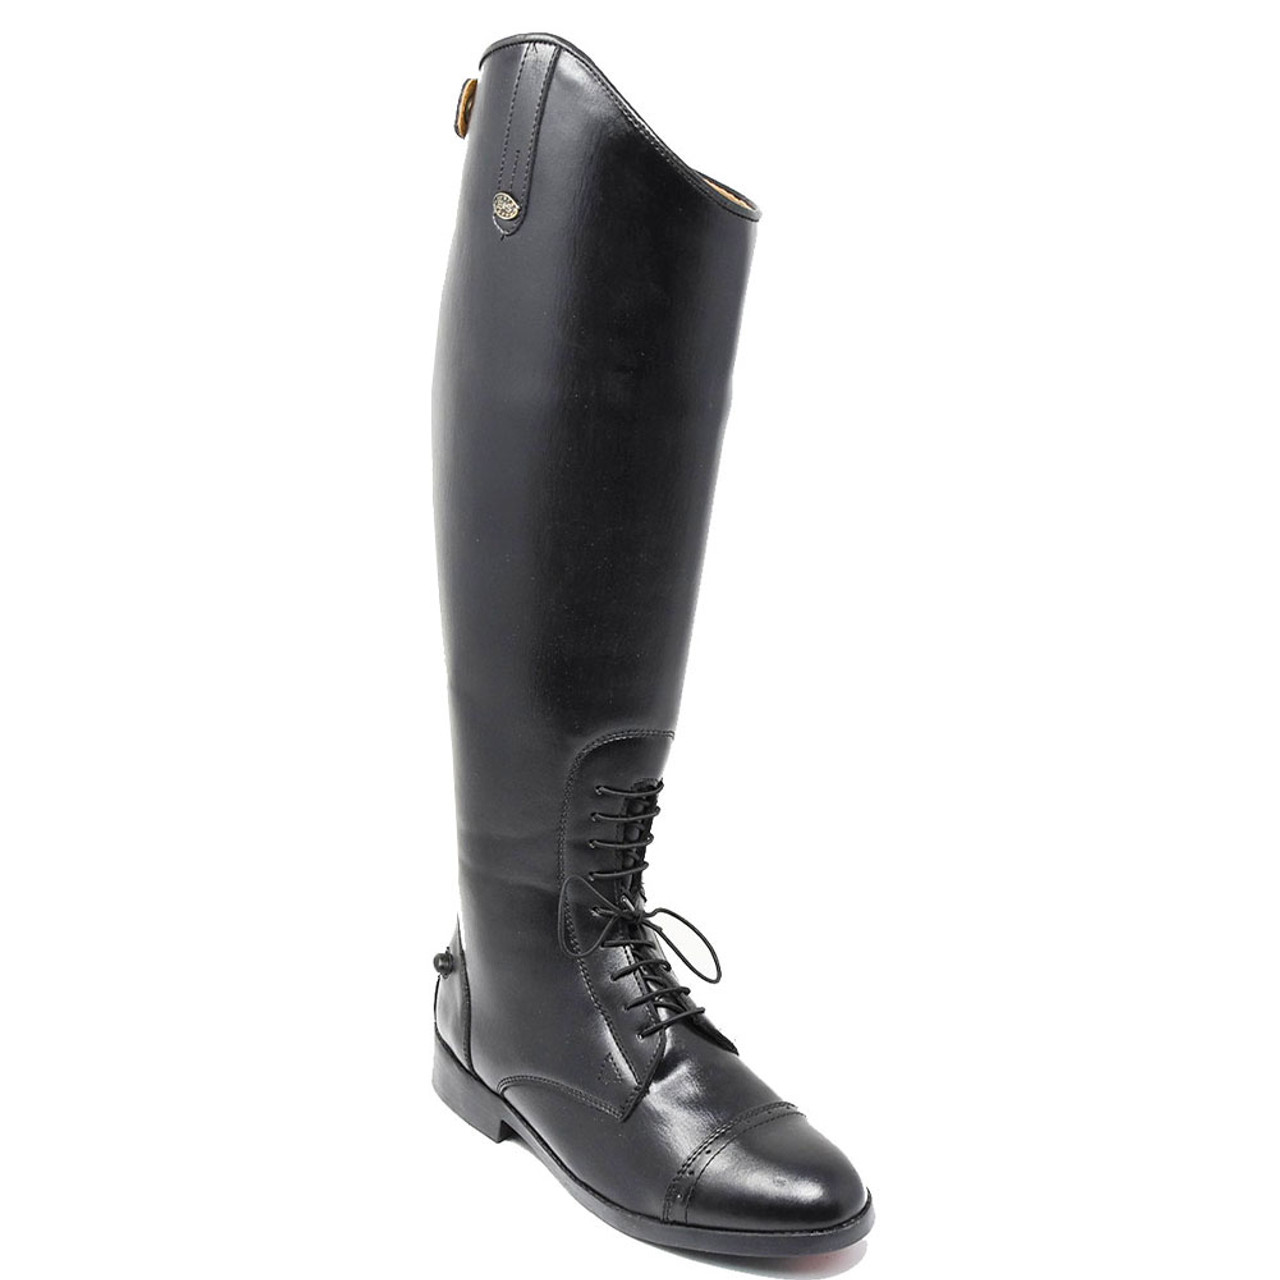 EQUISTAR Ladies All Weather Field Boot 467522